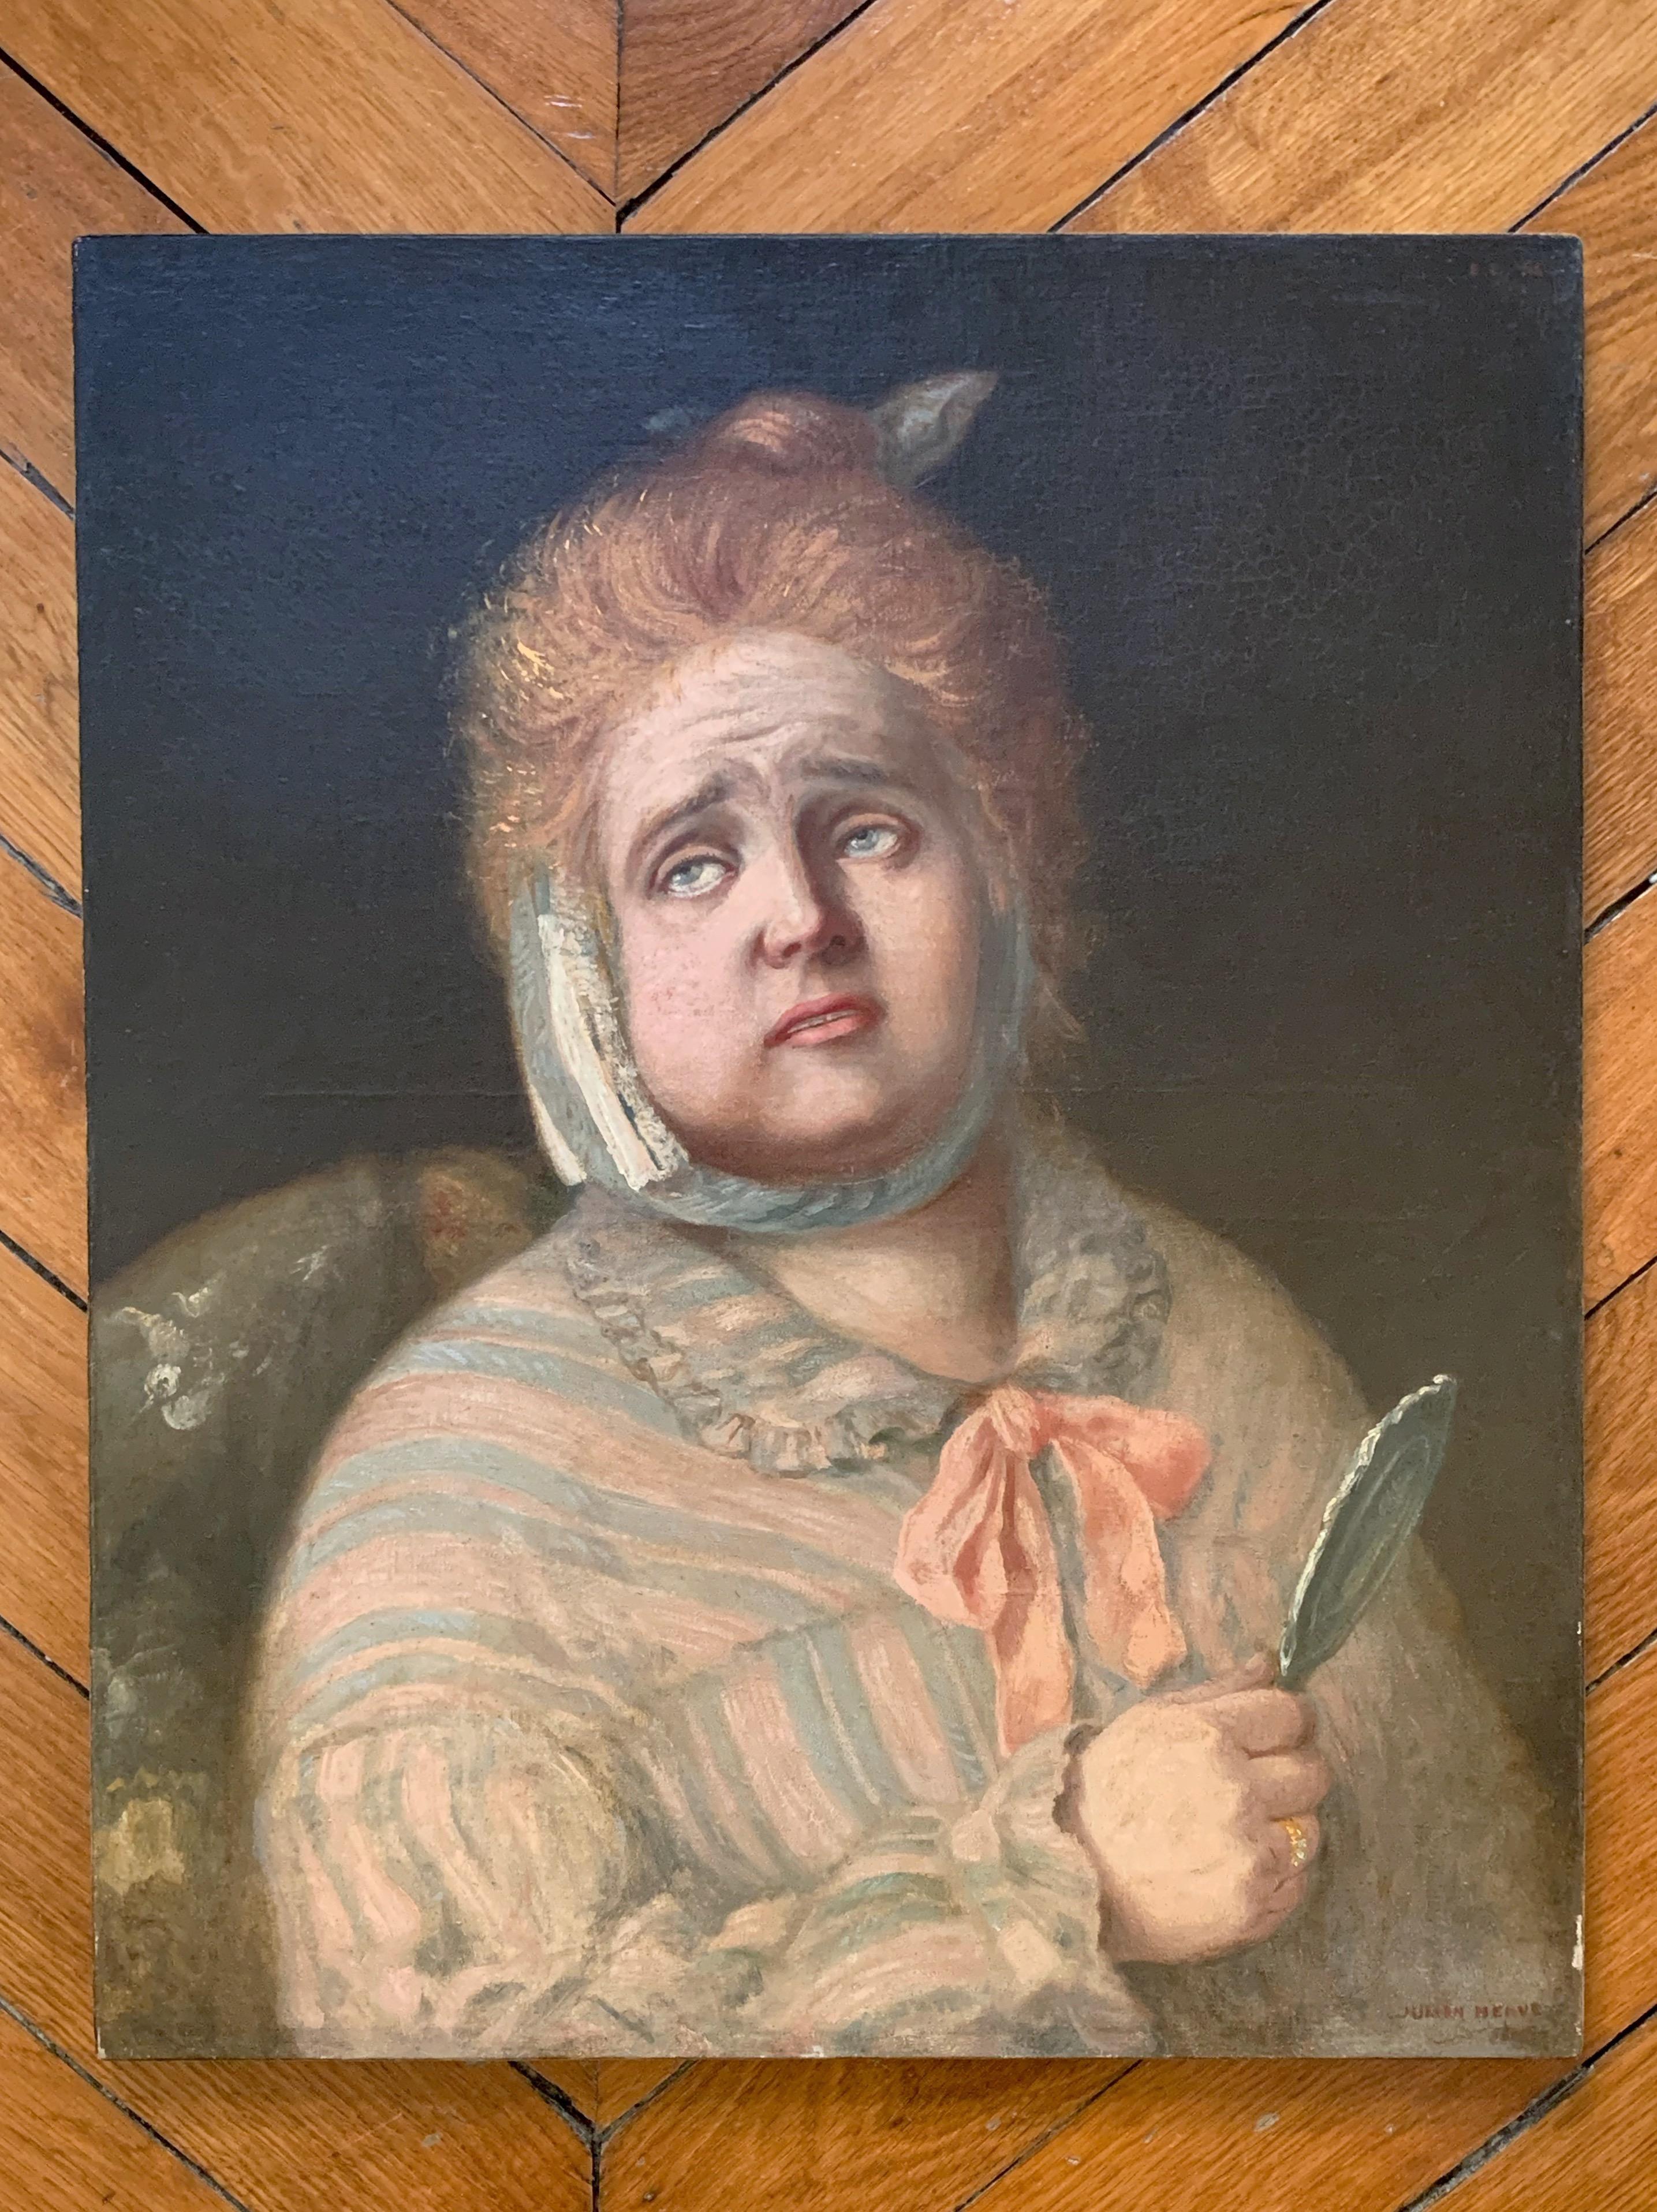 Portrait of a woman with a toothache, circa 1900, oil on canvas - Painting by Julien Auguste Hervé